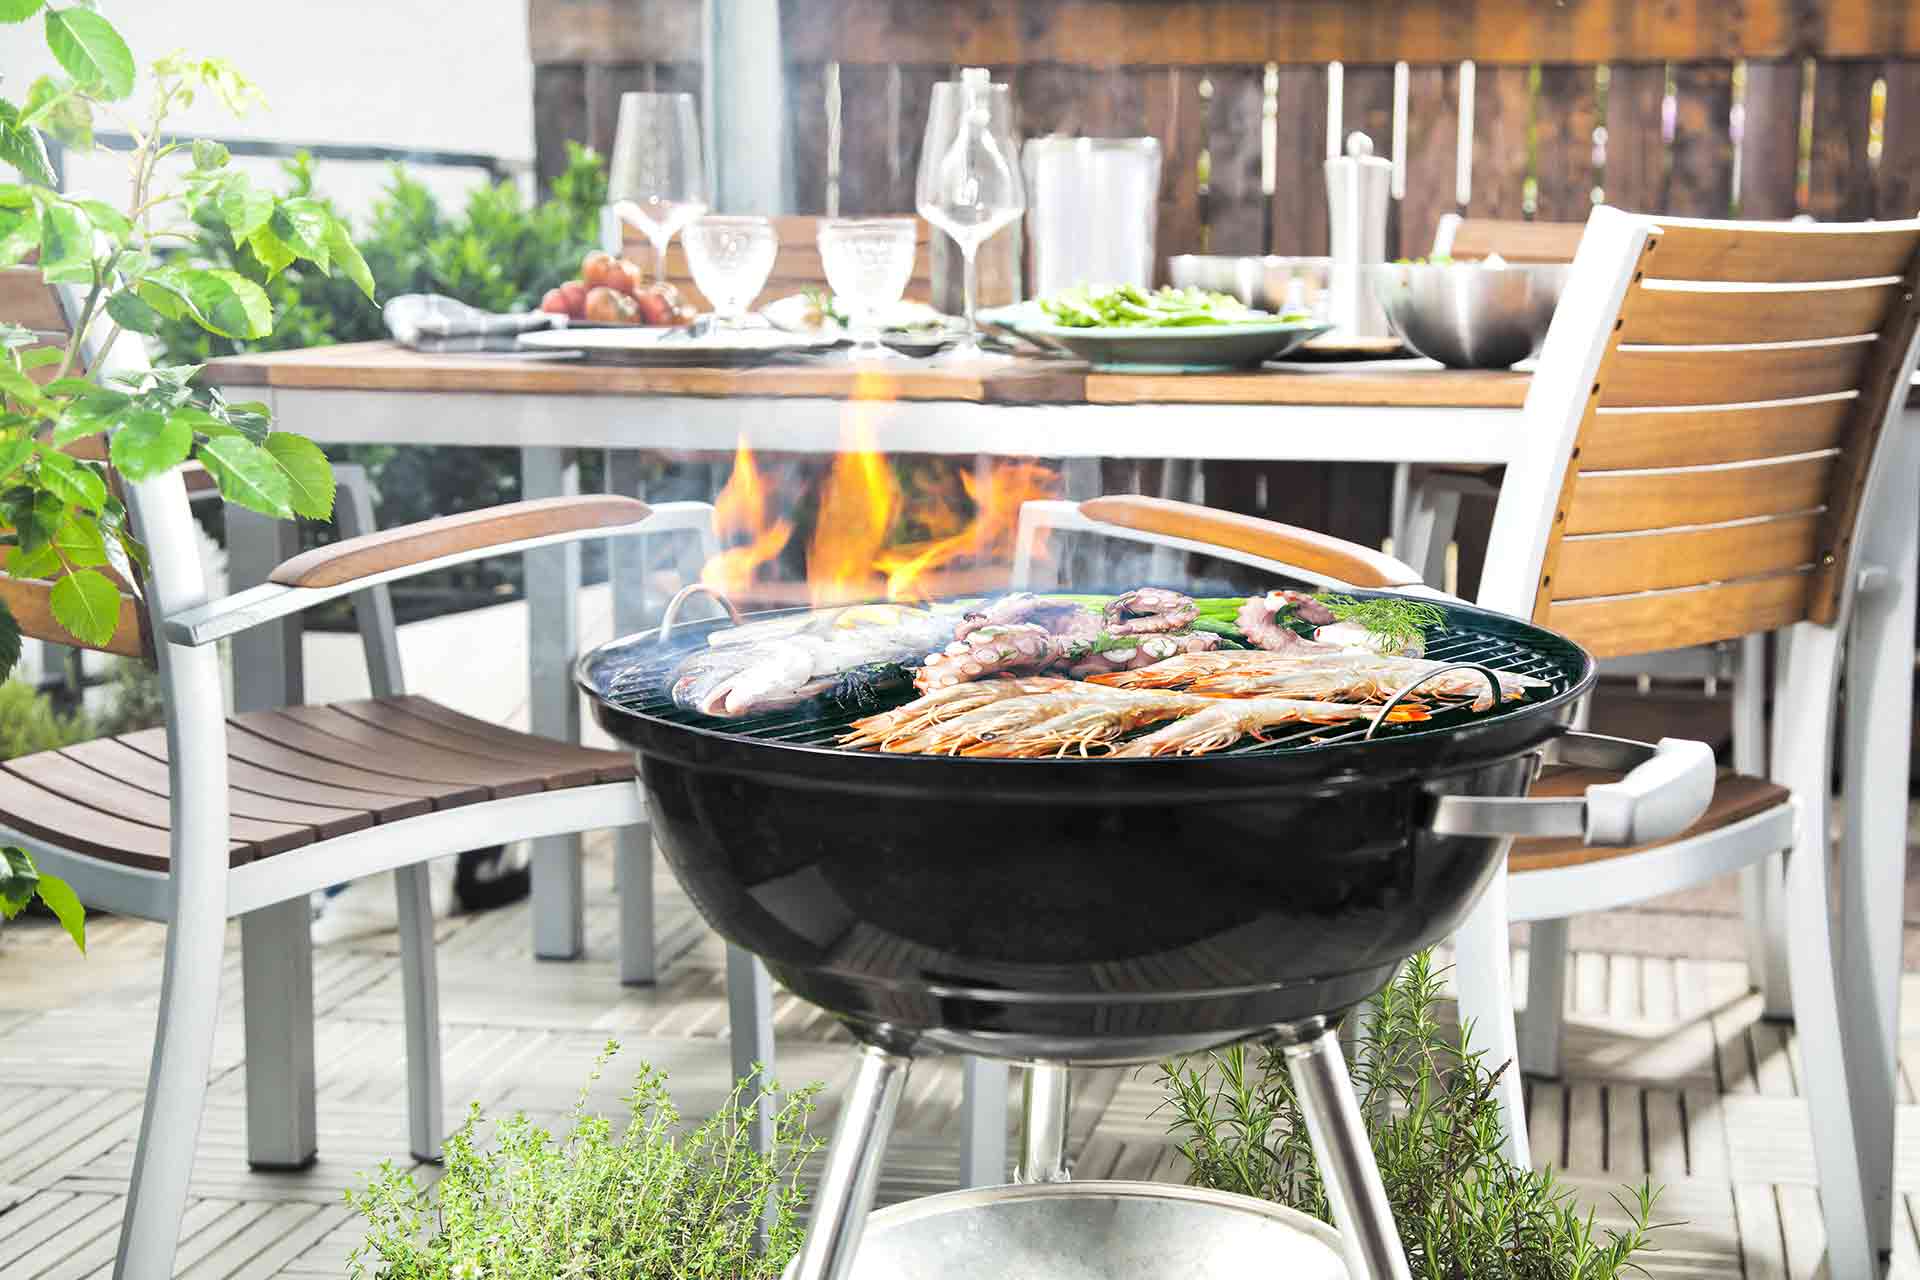 The best way to clean your barbecue